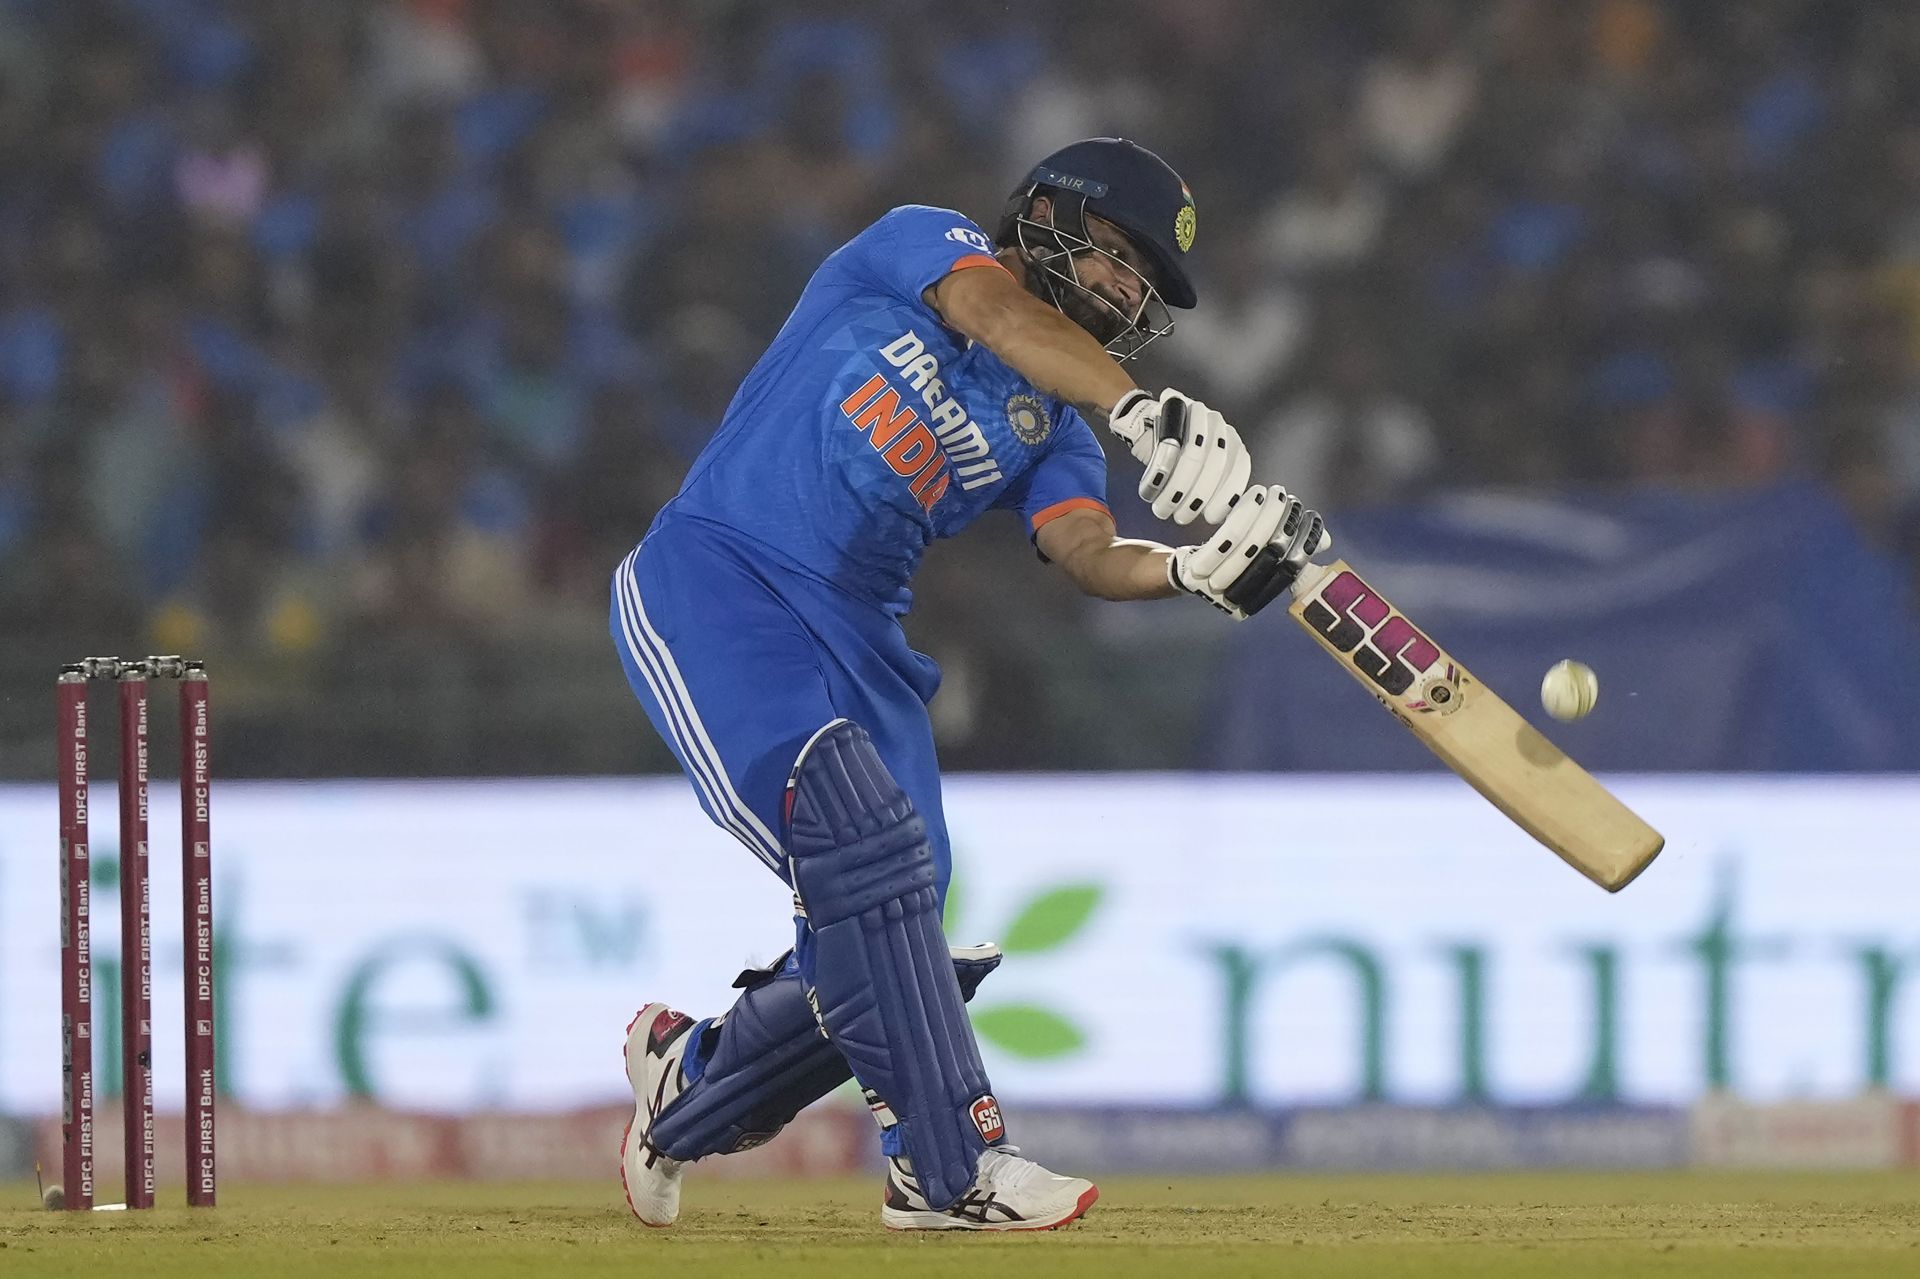 Rinku Singh scored 46 runs off 29 deliveries in the fourth T20I. [P/C: AP]